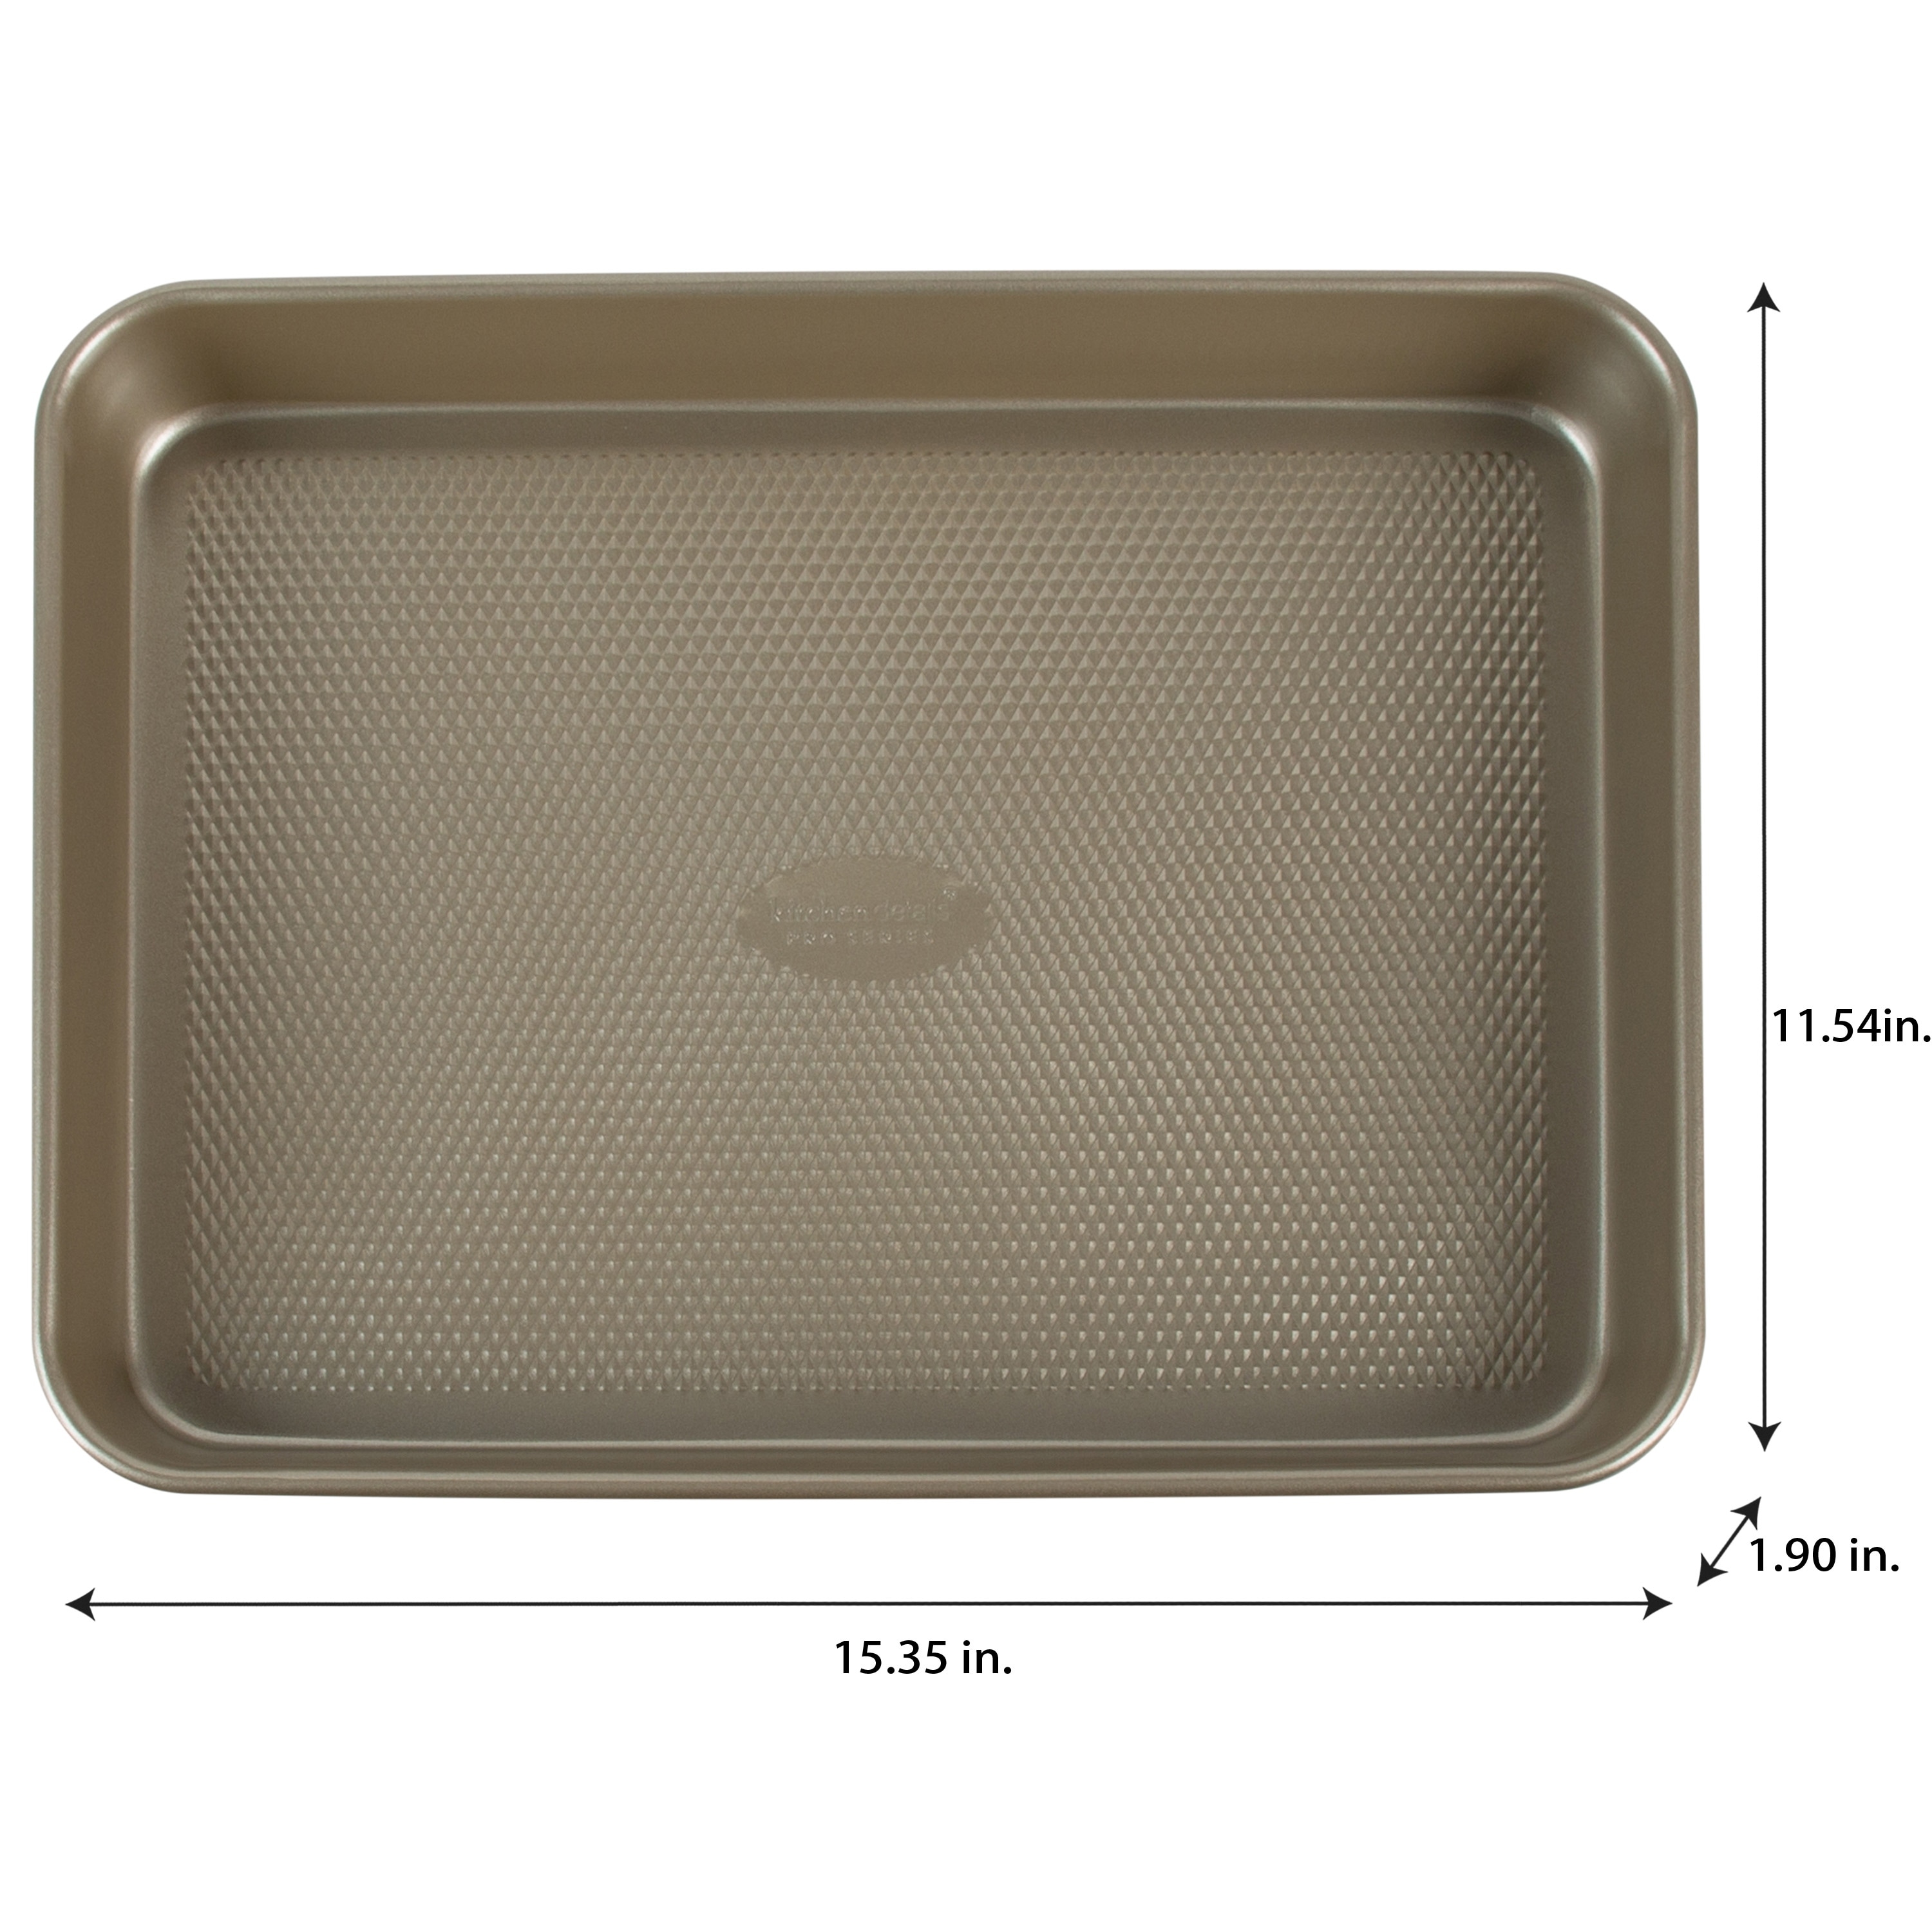 Kitchen Details Pro Series 6 Cup Muffin Pan with Diamond Base - Gold